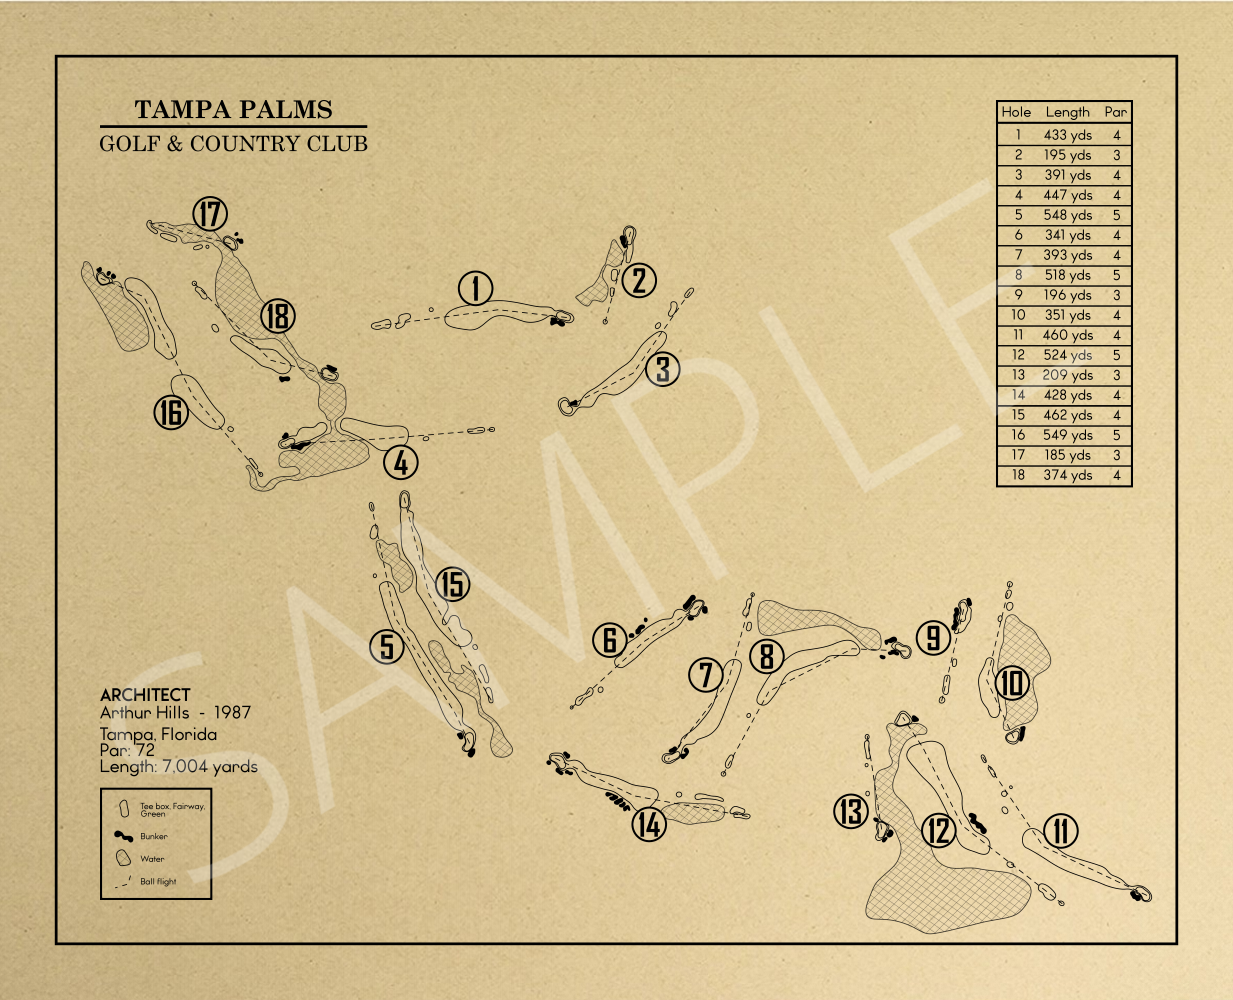 Tampa Palms Golf & Country Club Outline (Print)